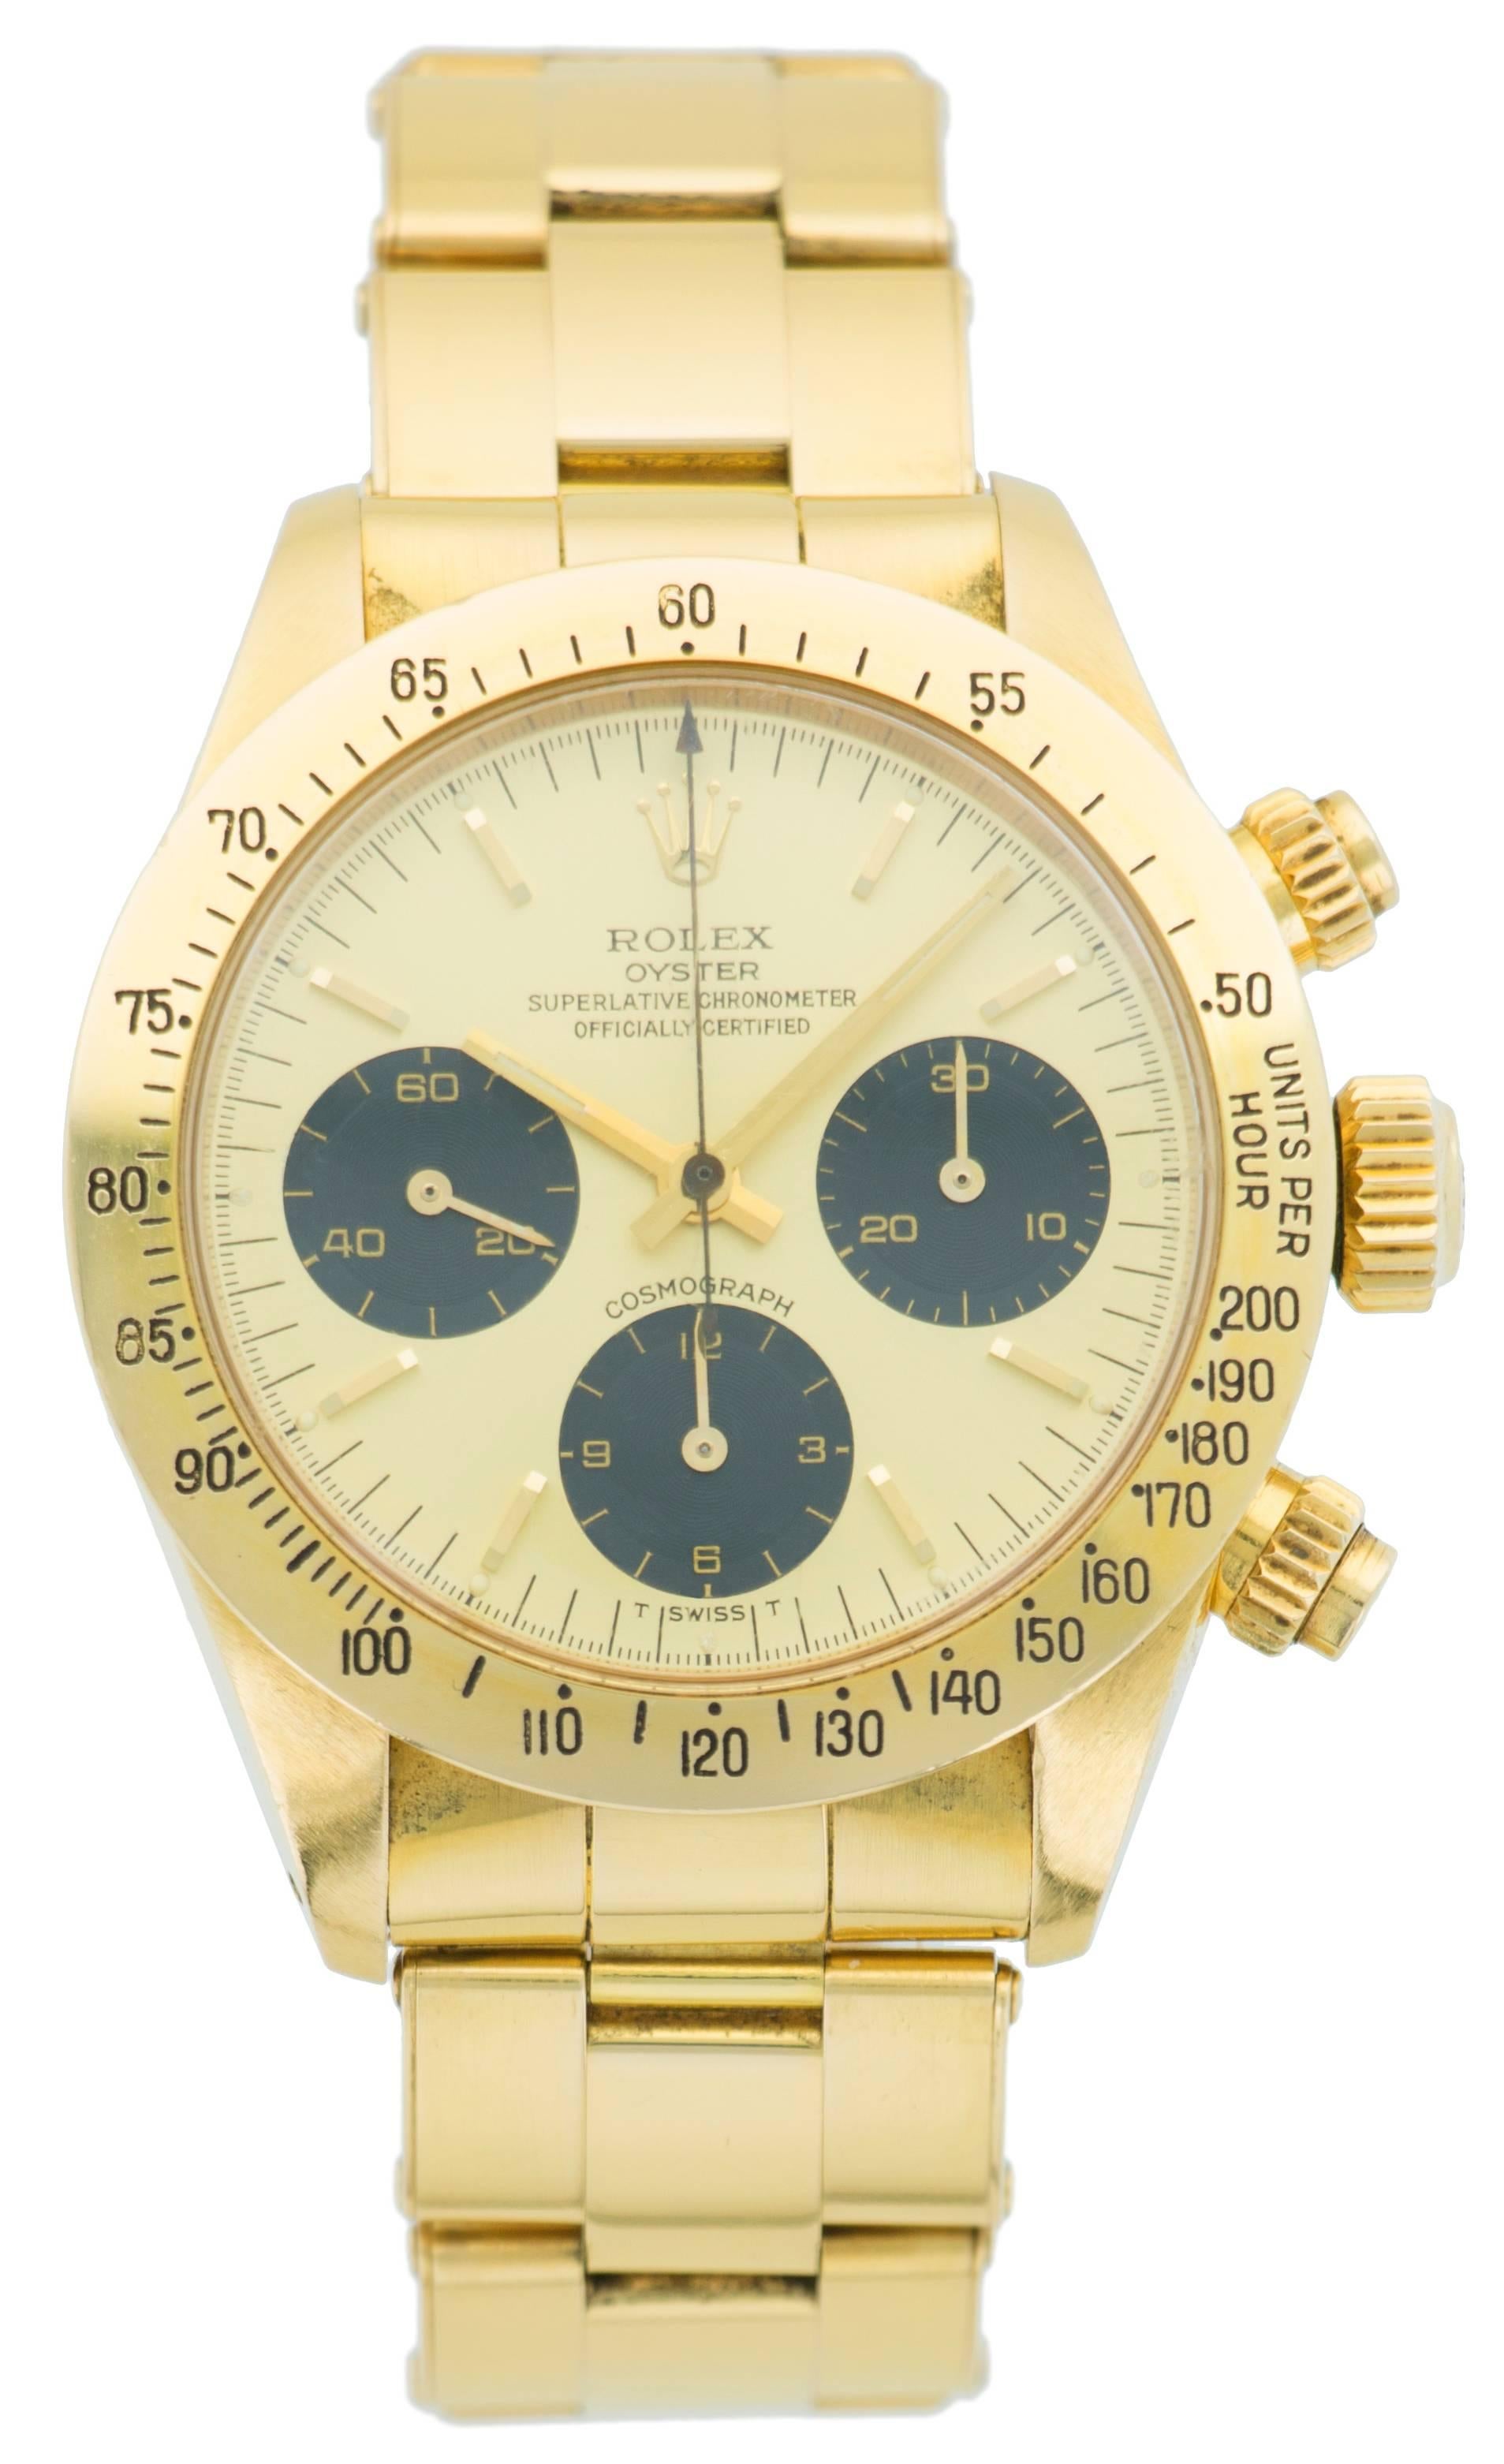 This stunning Rolex Daytona 6265 is in fantastic condition and comes complete with box, paper and hangtag. It is increasingly rare to find these pieces in such amazing condition and with all original packaging. This is many collectors dream piece. 